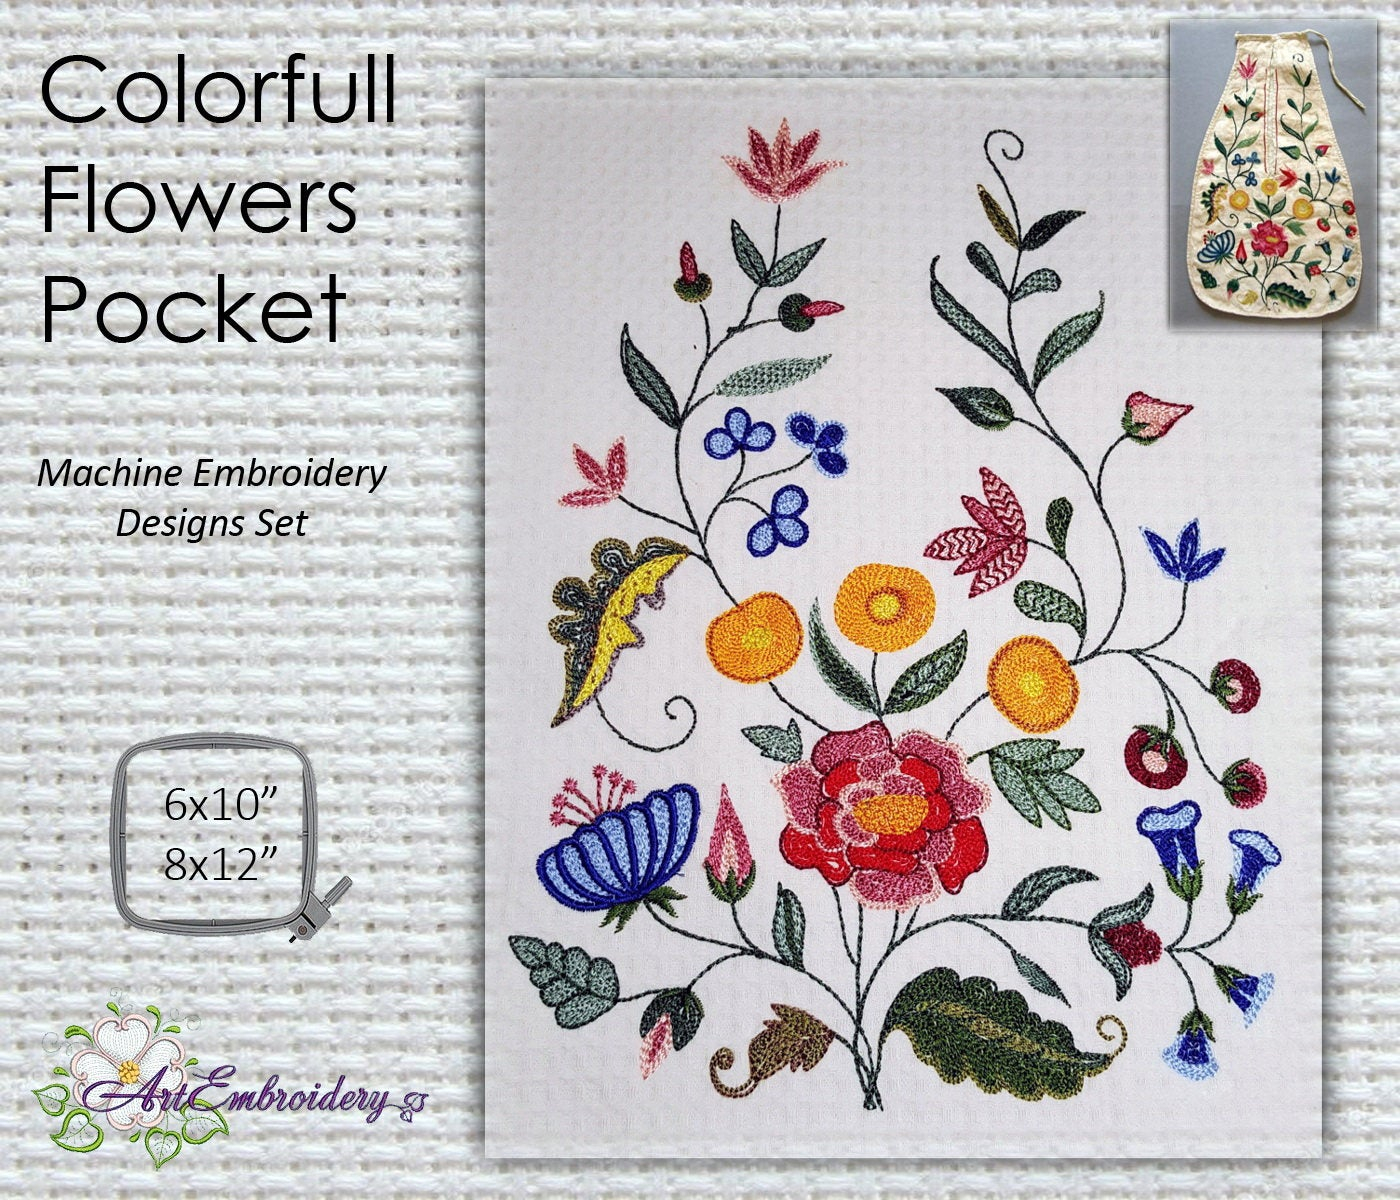 18Th Century Embroidery Patterns Colorful Flowers Pocket Machine Embroidery Designs Set For Hoops 6x108x10 And 8x12 Created From Historical 18 Century Pocket